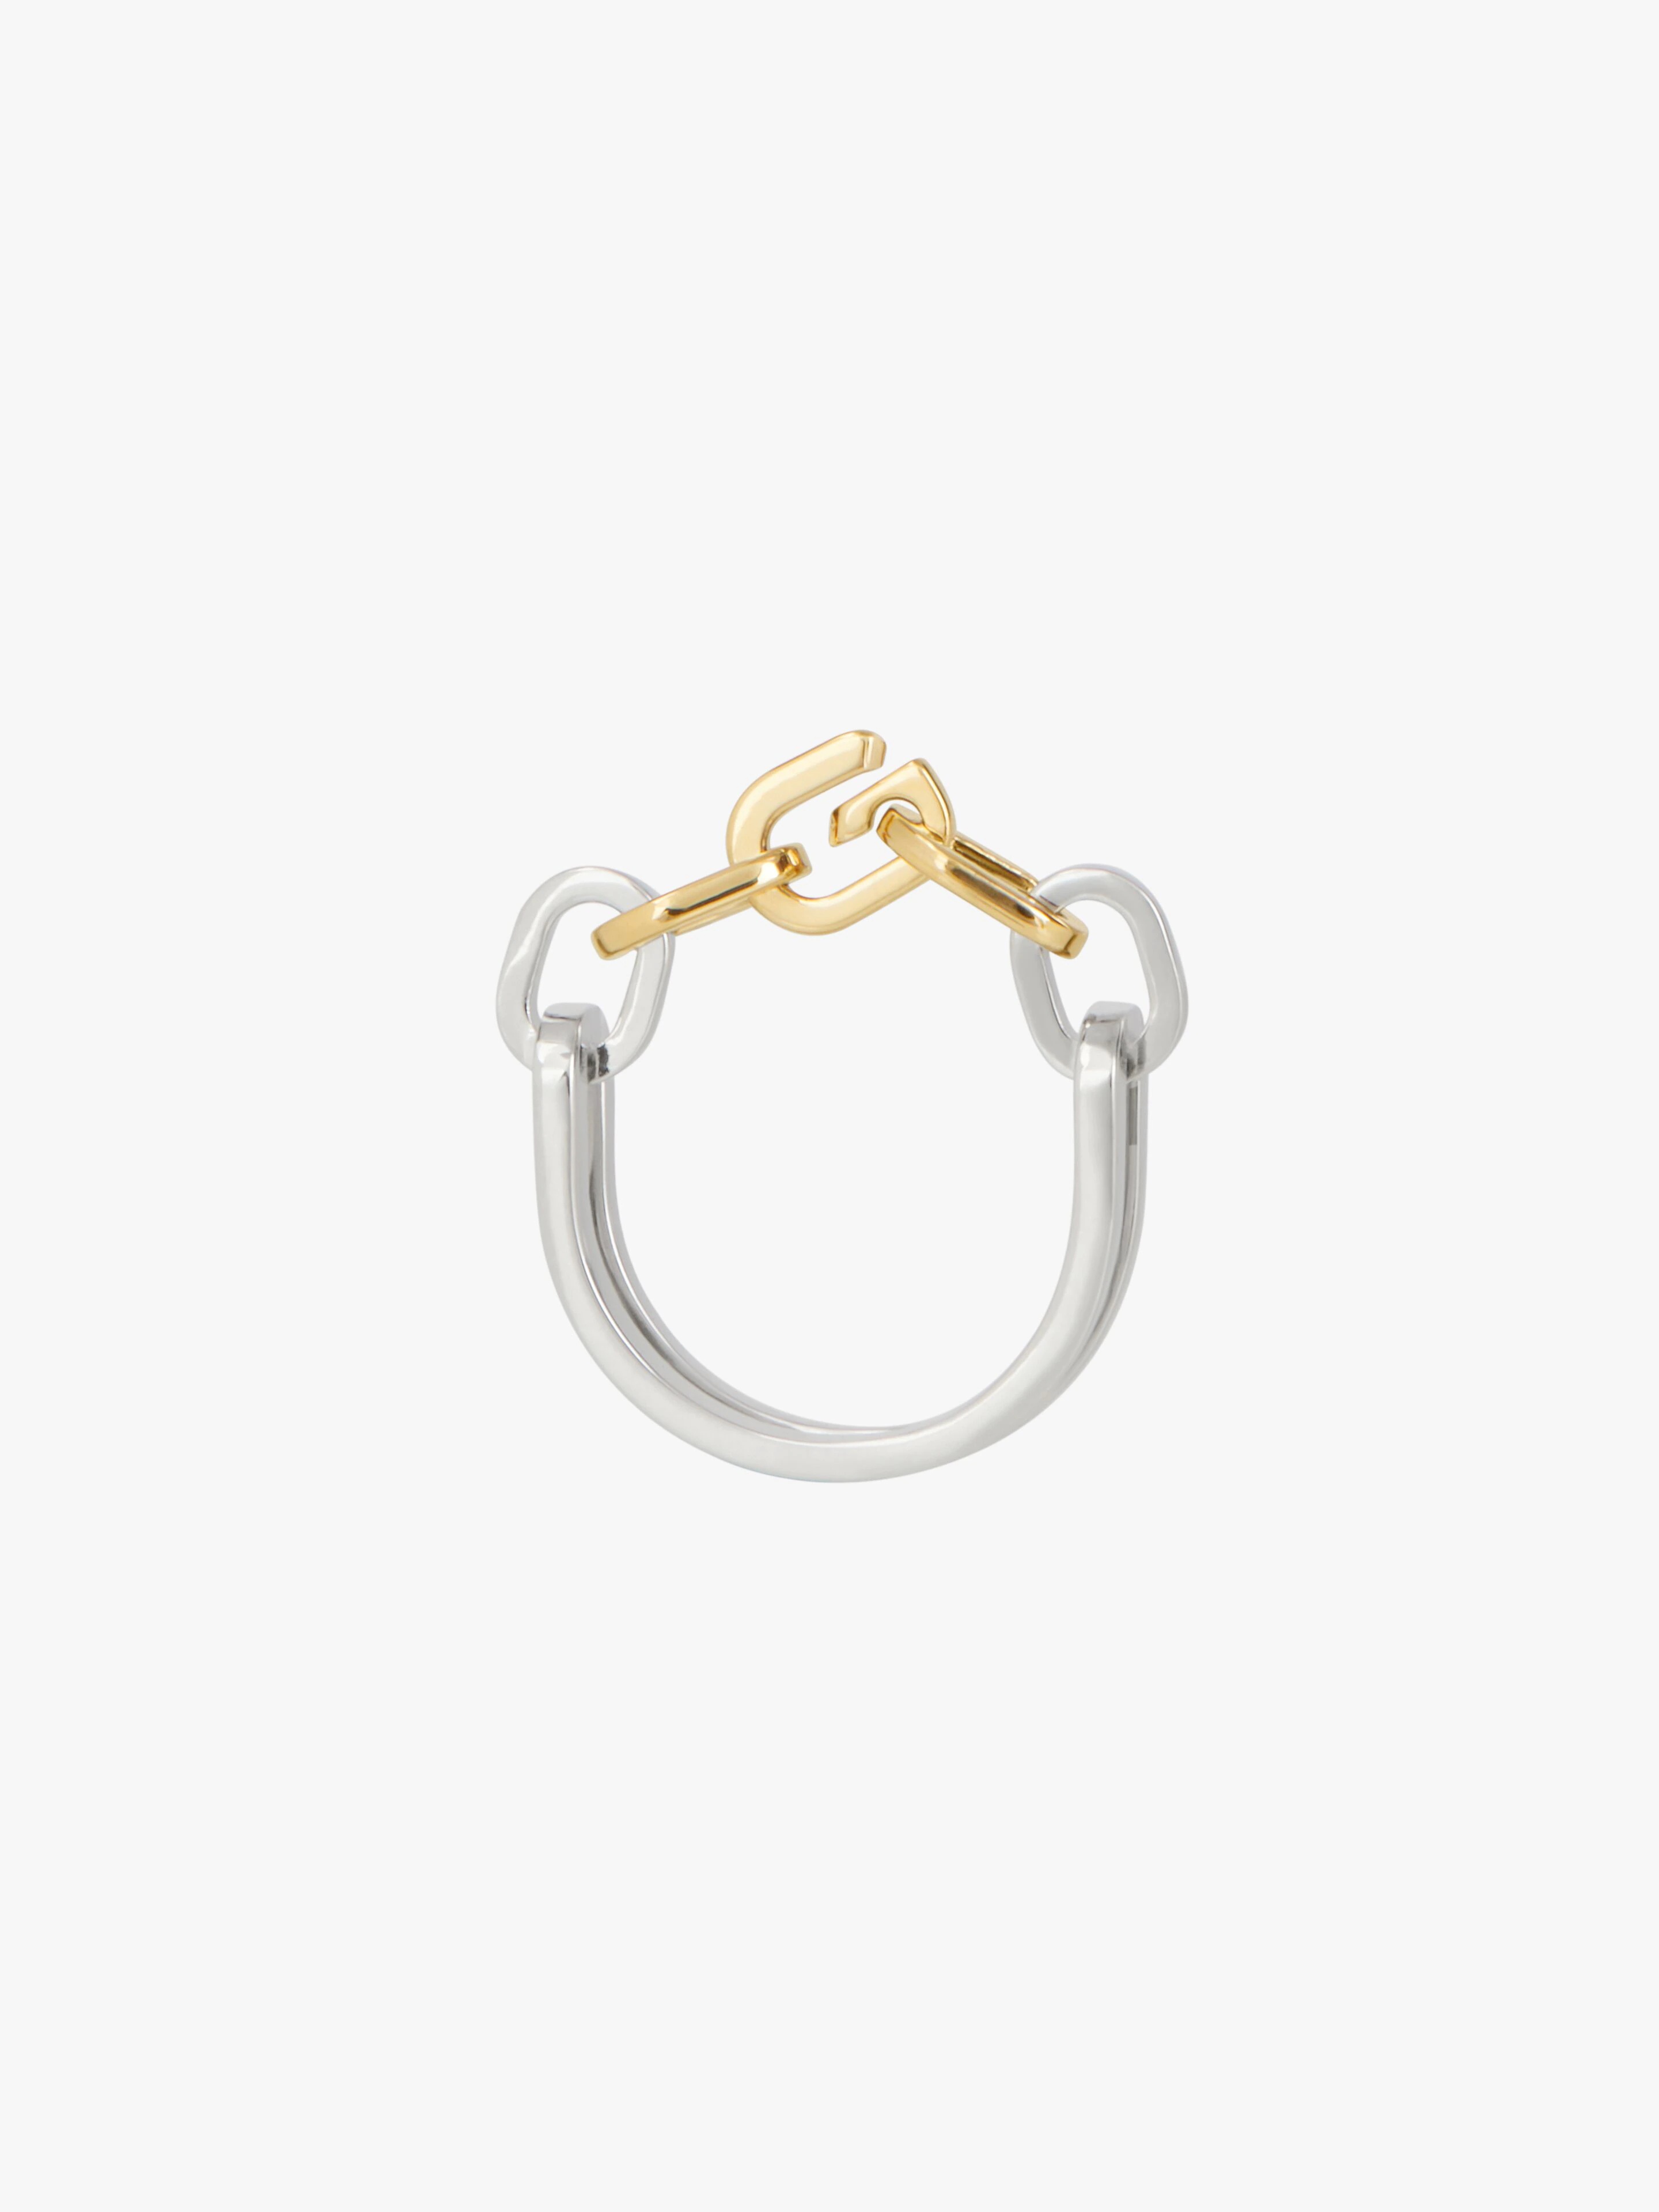 G LINK TWO TONE RING - 1